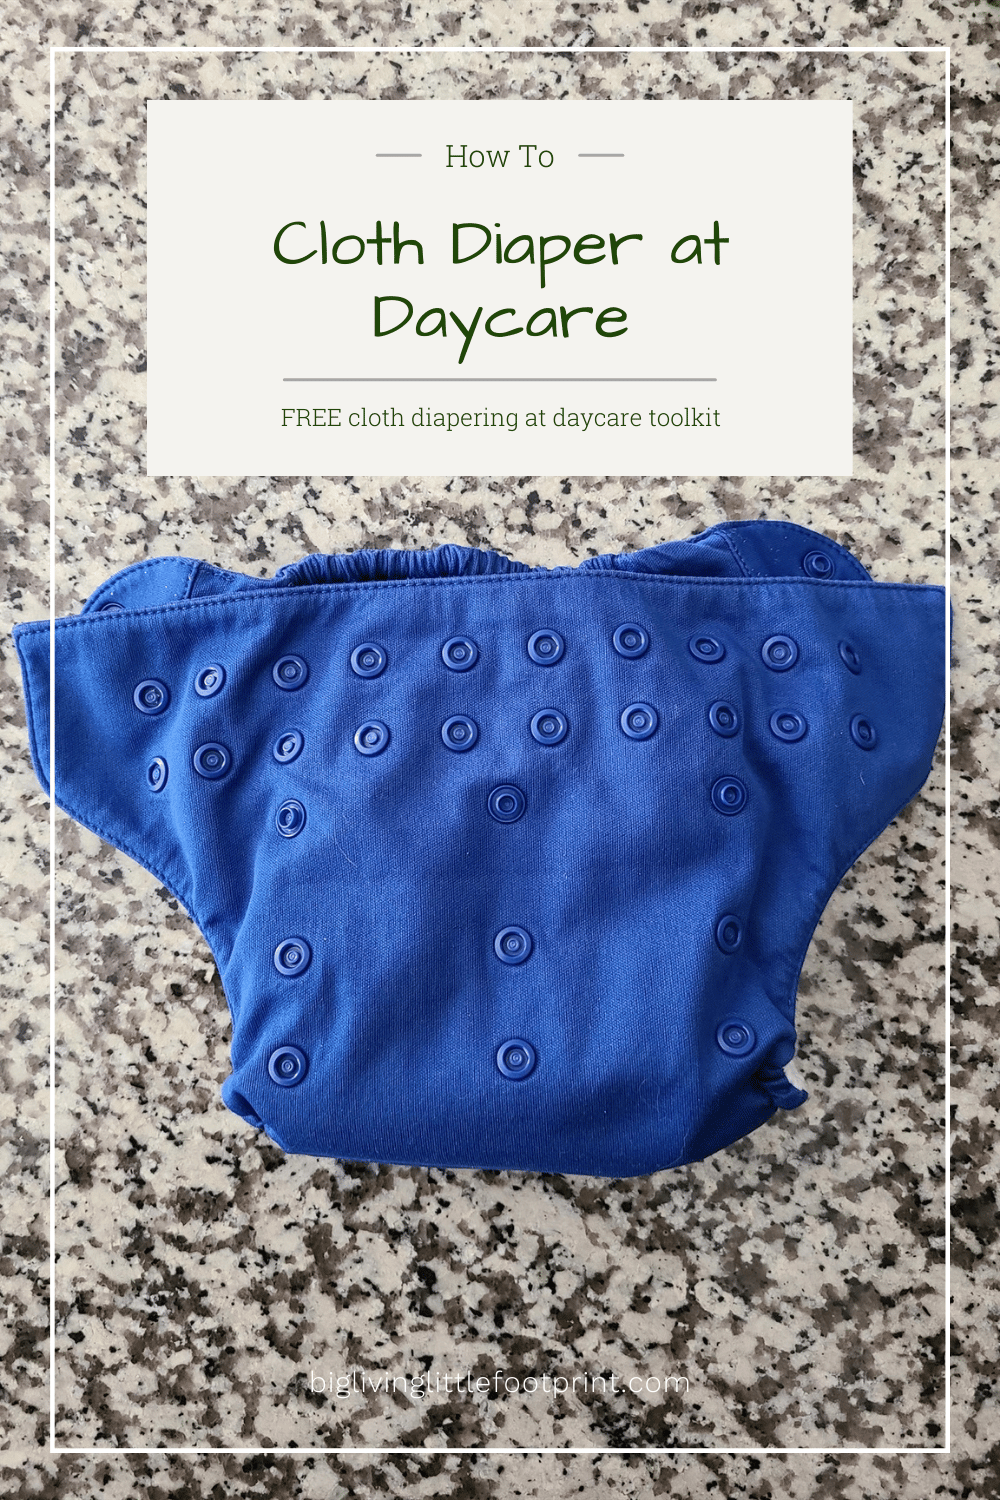 How to Cloth Diaper at Daycare - Big Living